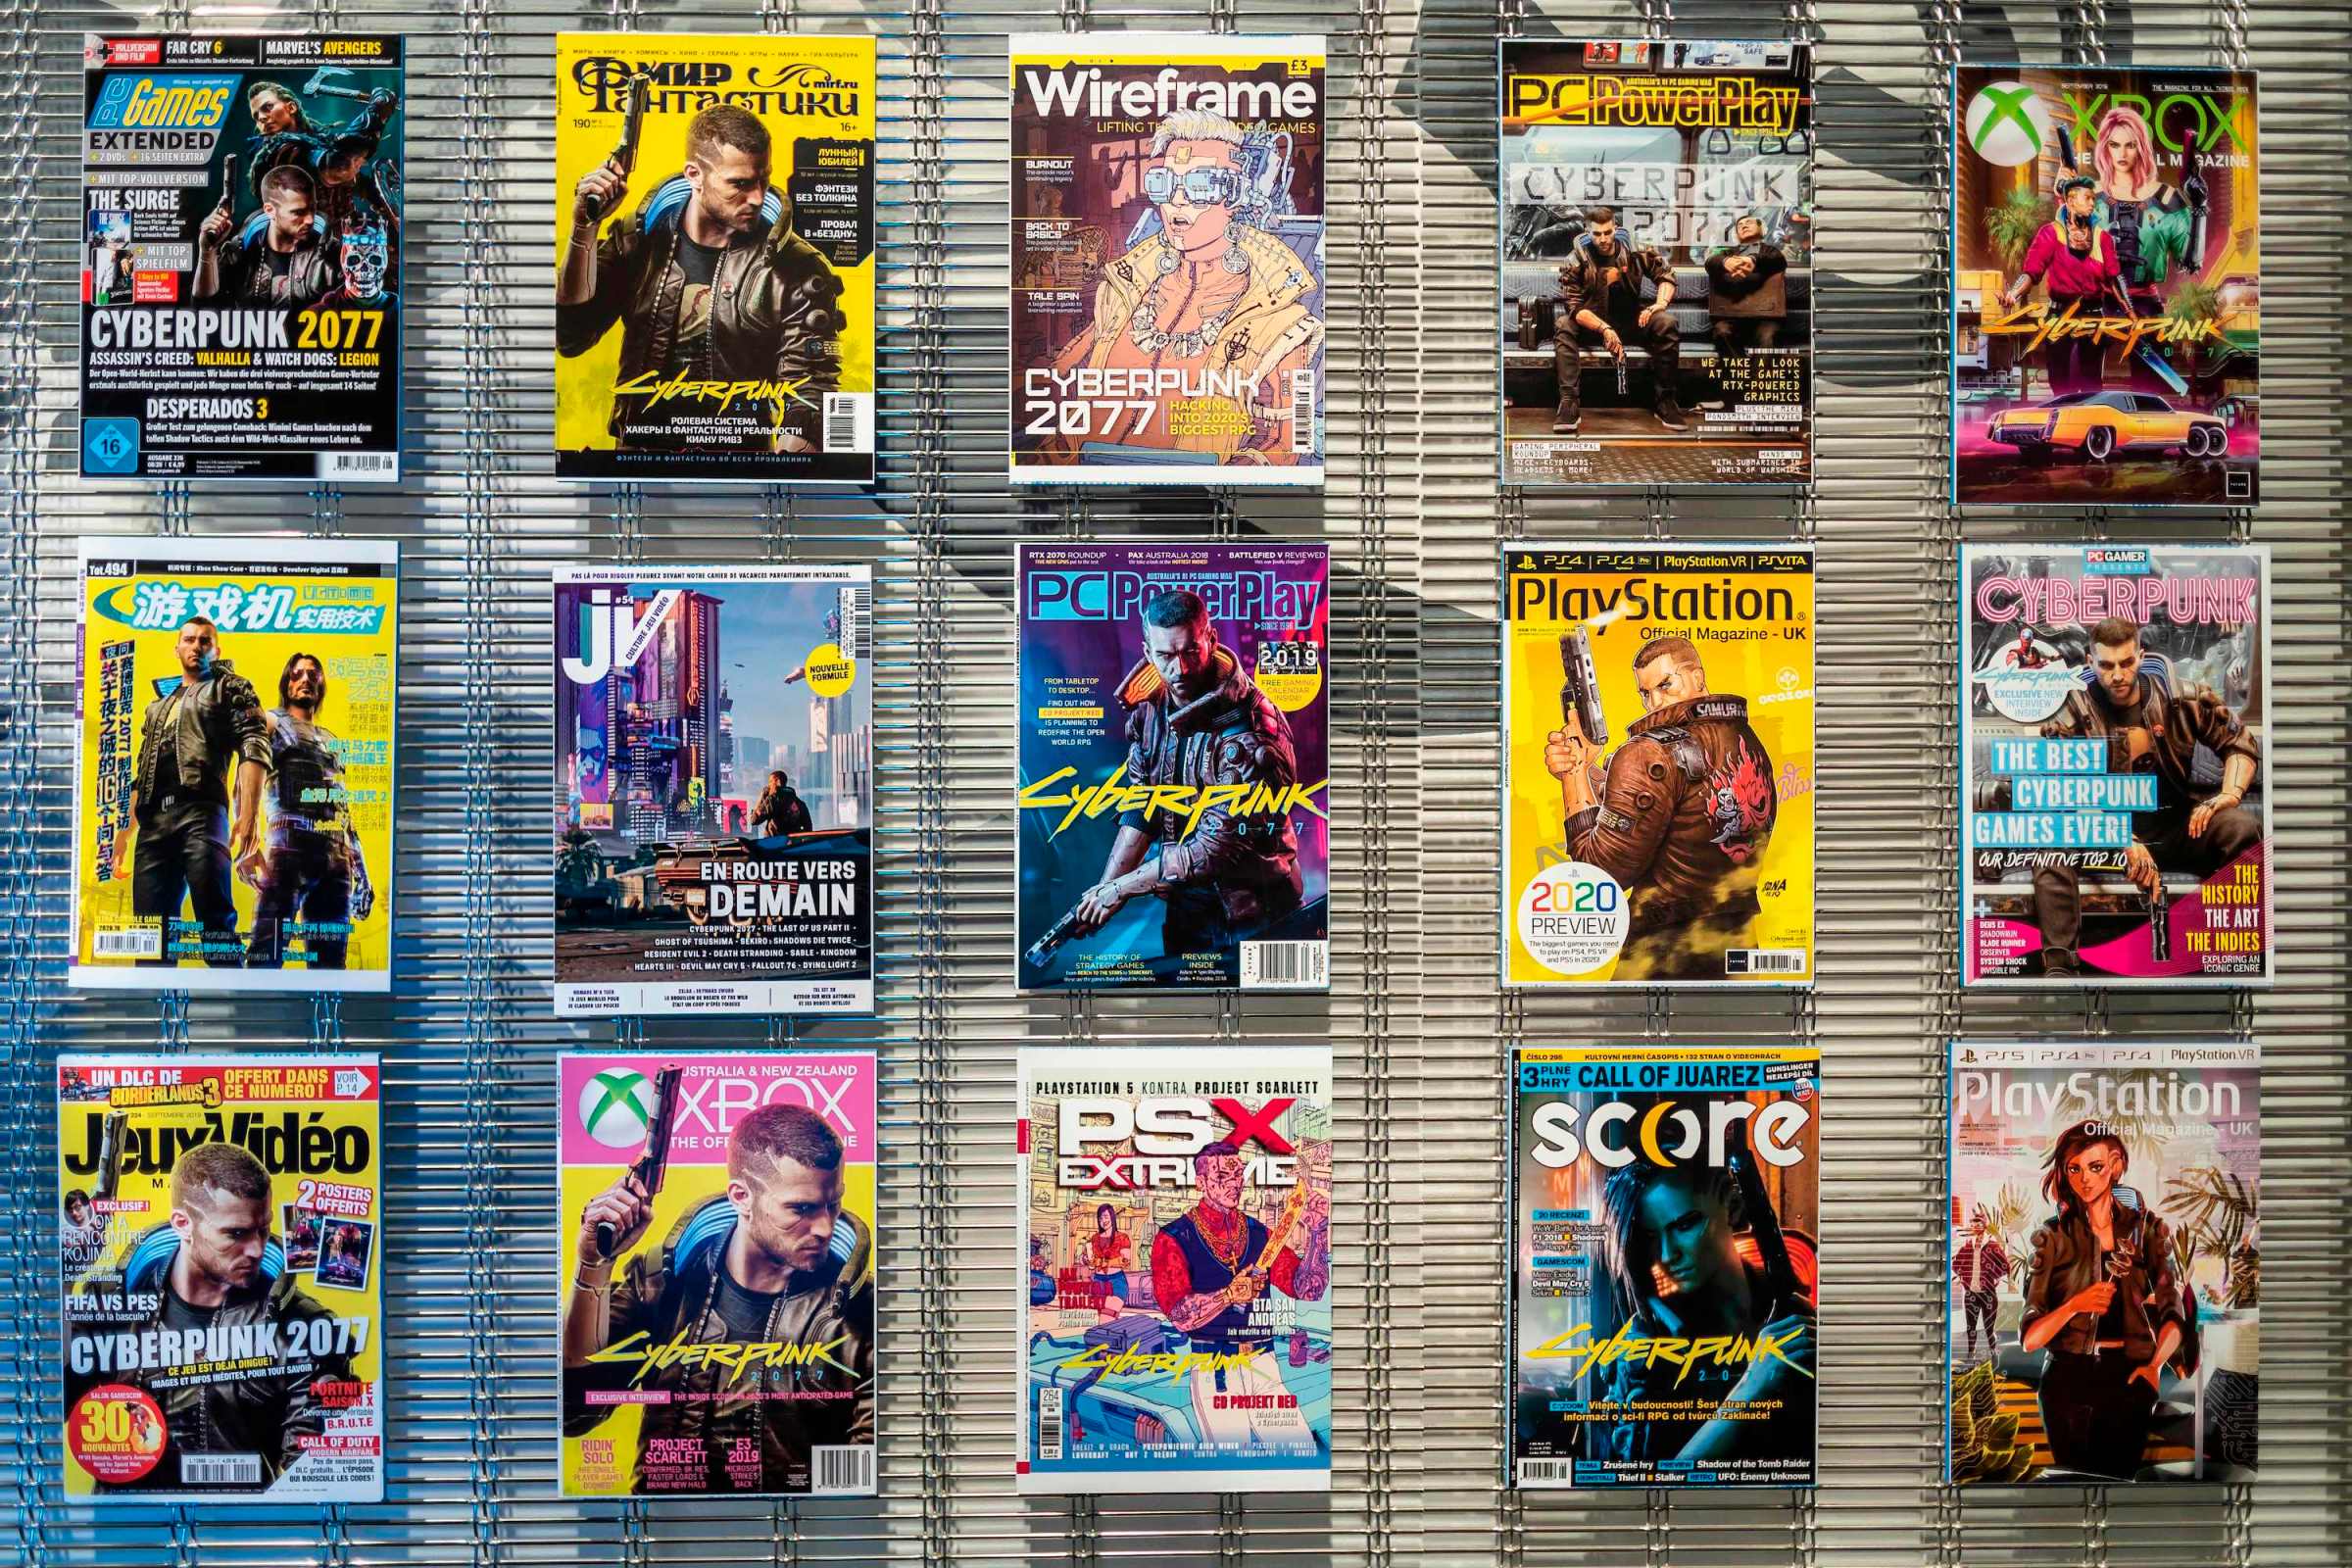 Magazine covers with Cyberpunk characters are seen in the headquarter of CD PROJECT - the most important polish game developer company, poses for a photo on December 4, 20202 before the expected release of Cyberpunk 2077 game, in Warsaw, Poland.